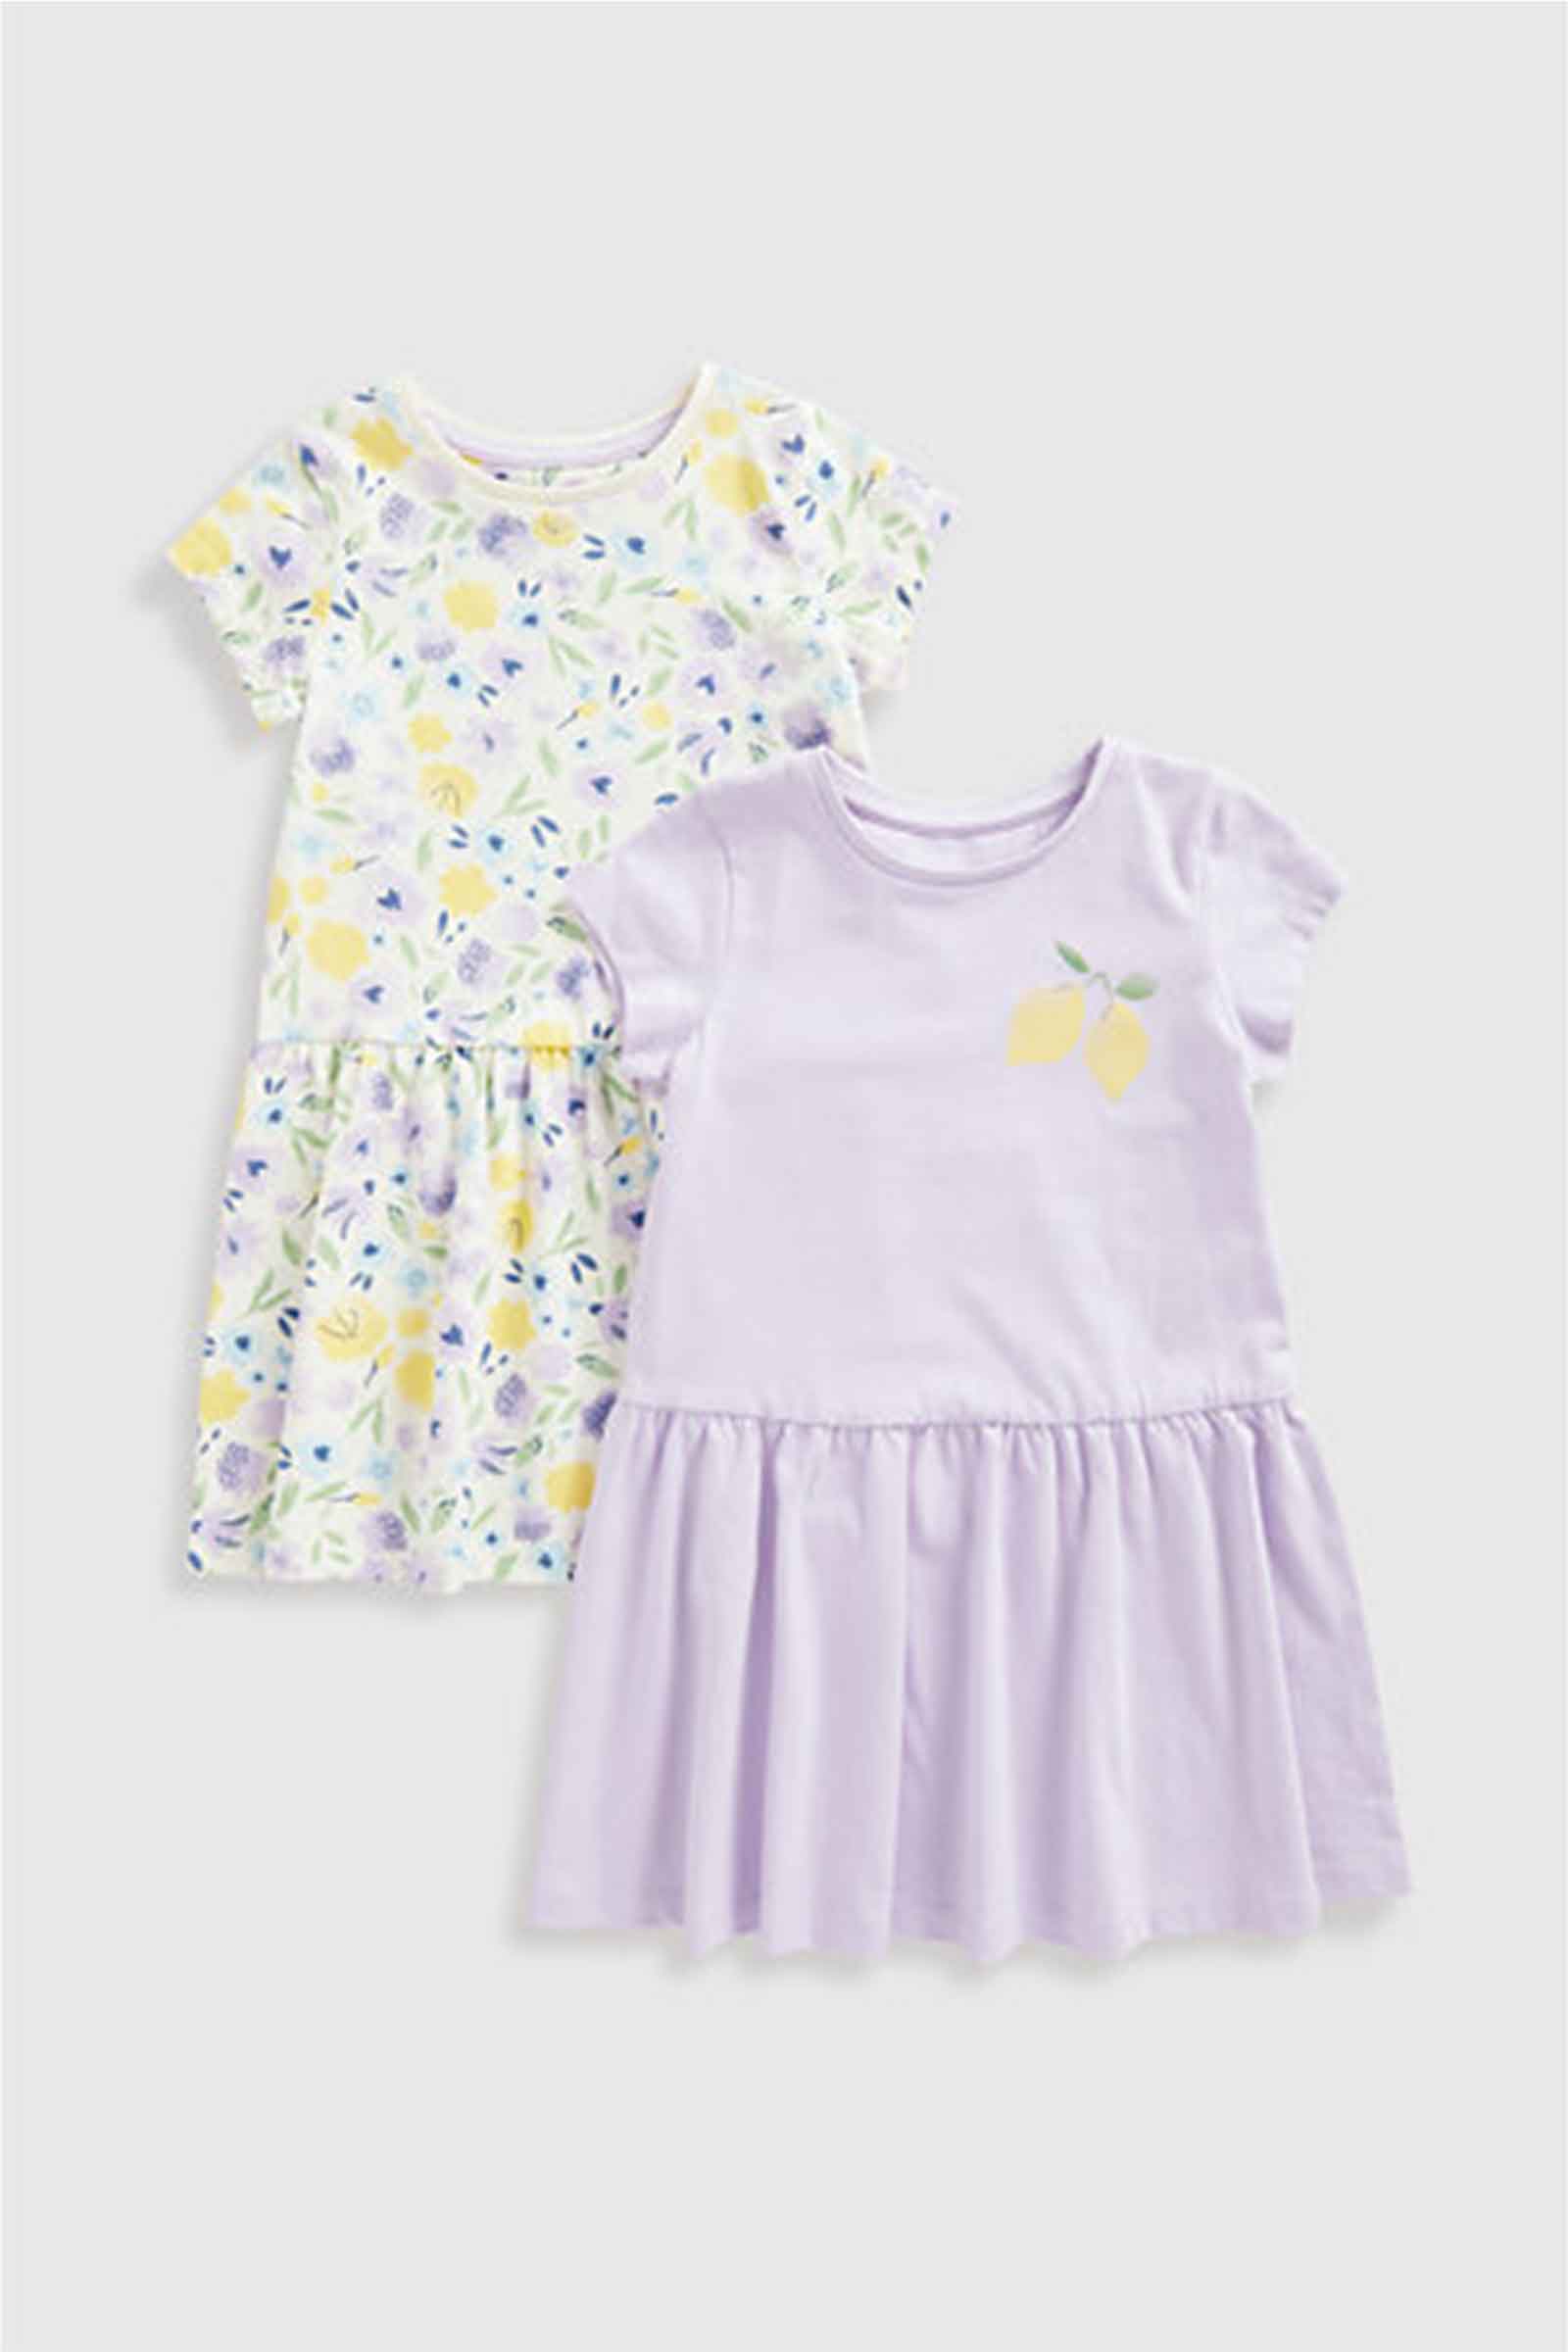 Mothercare Lemon And Lilac Jersey Dresses - 2 Pack